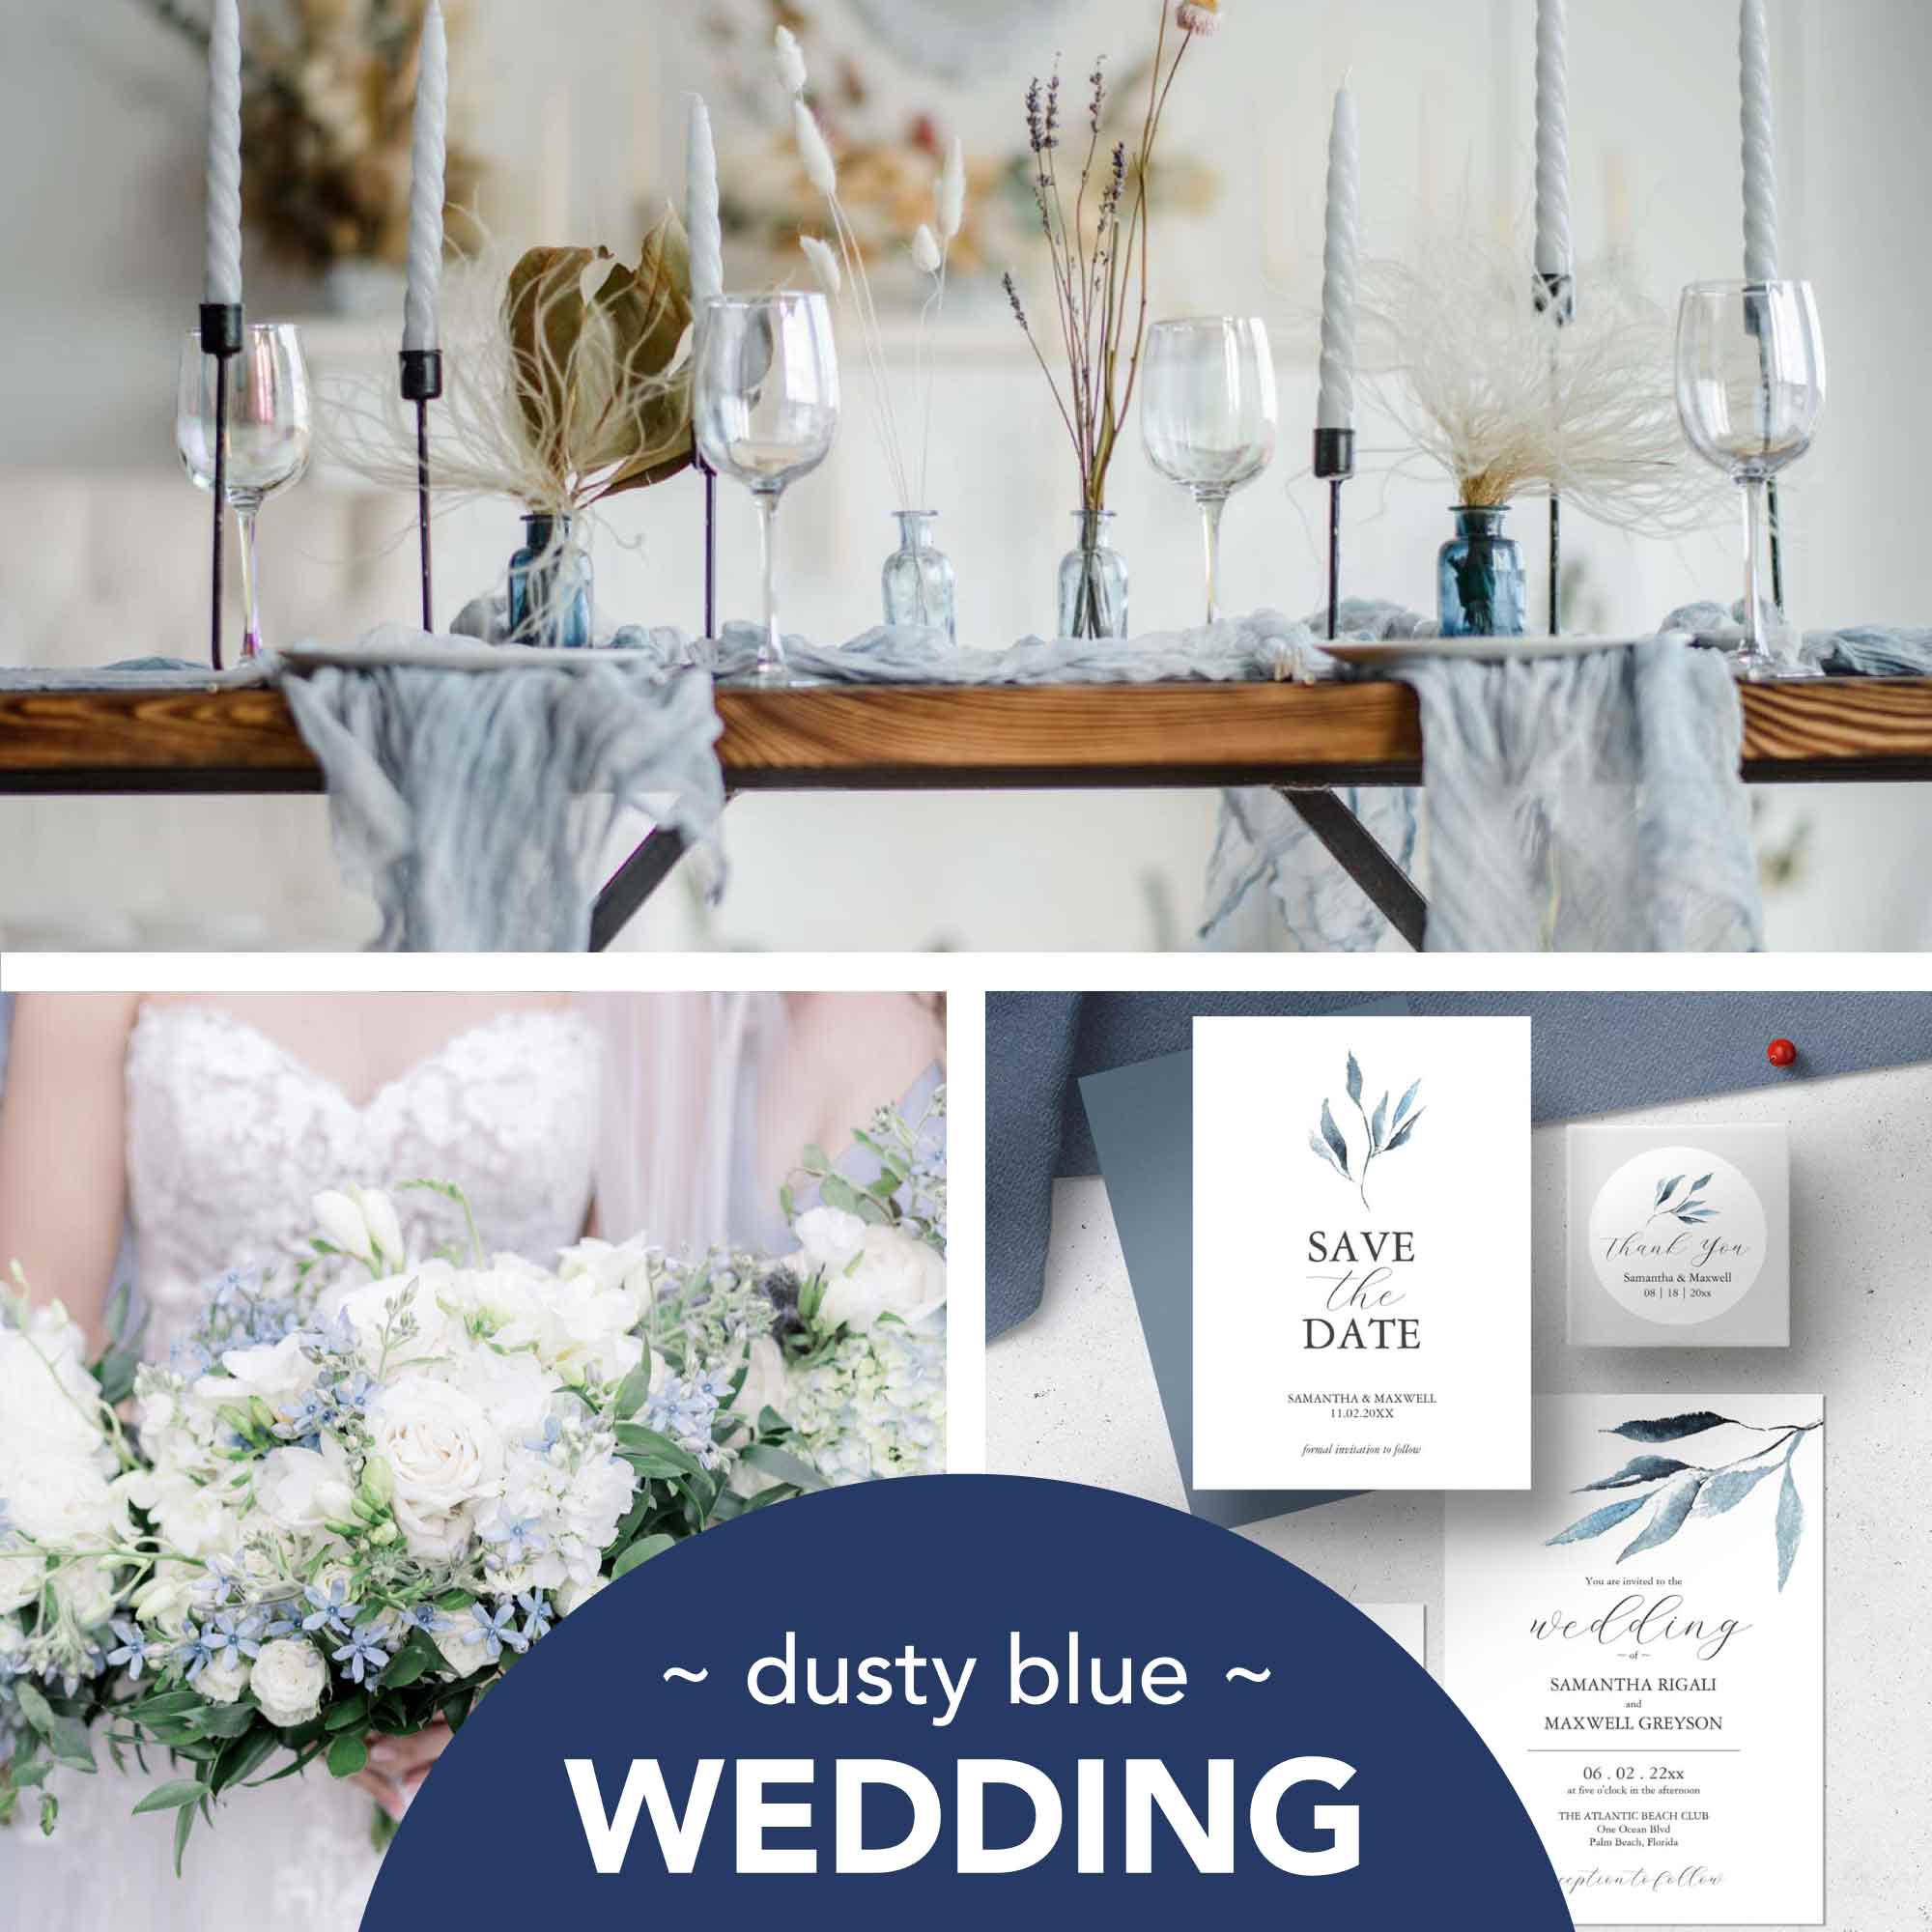 Dusty blue wedding inspiration. Click to see more.